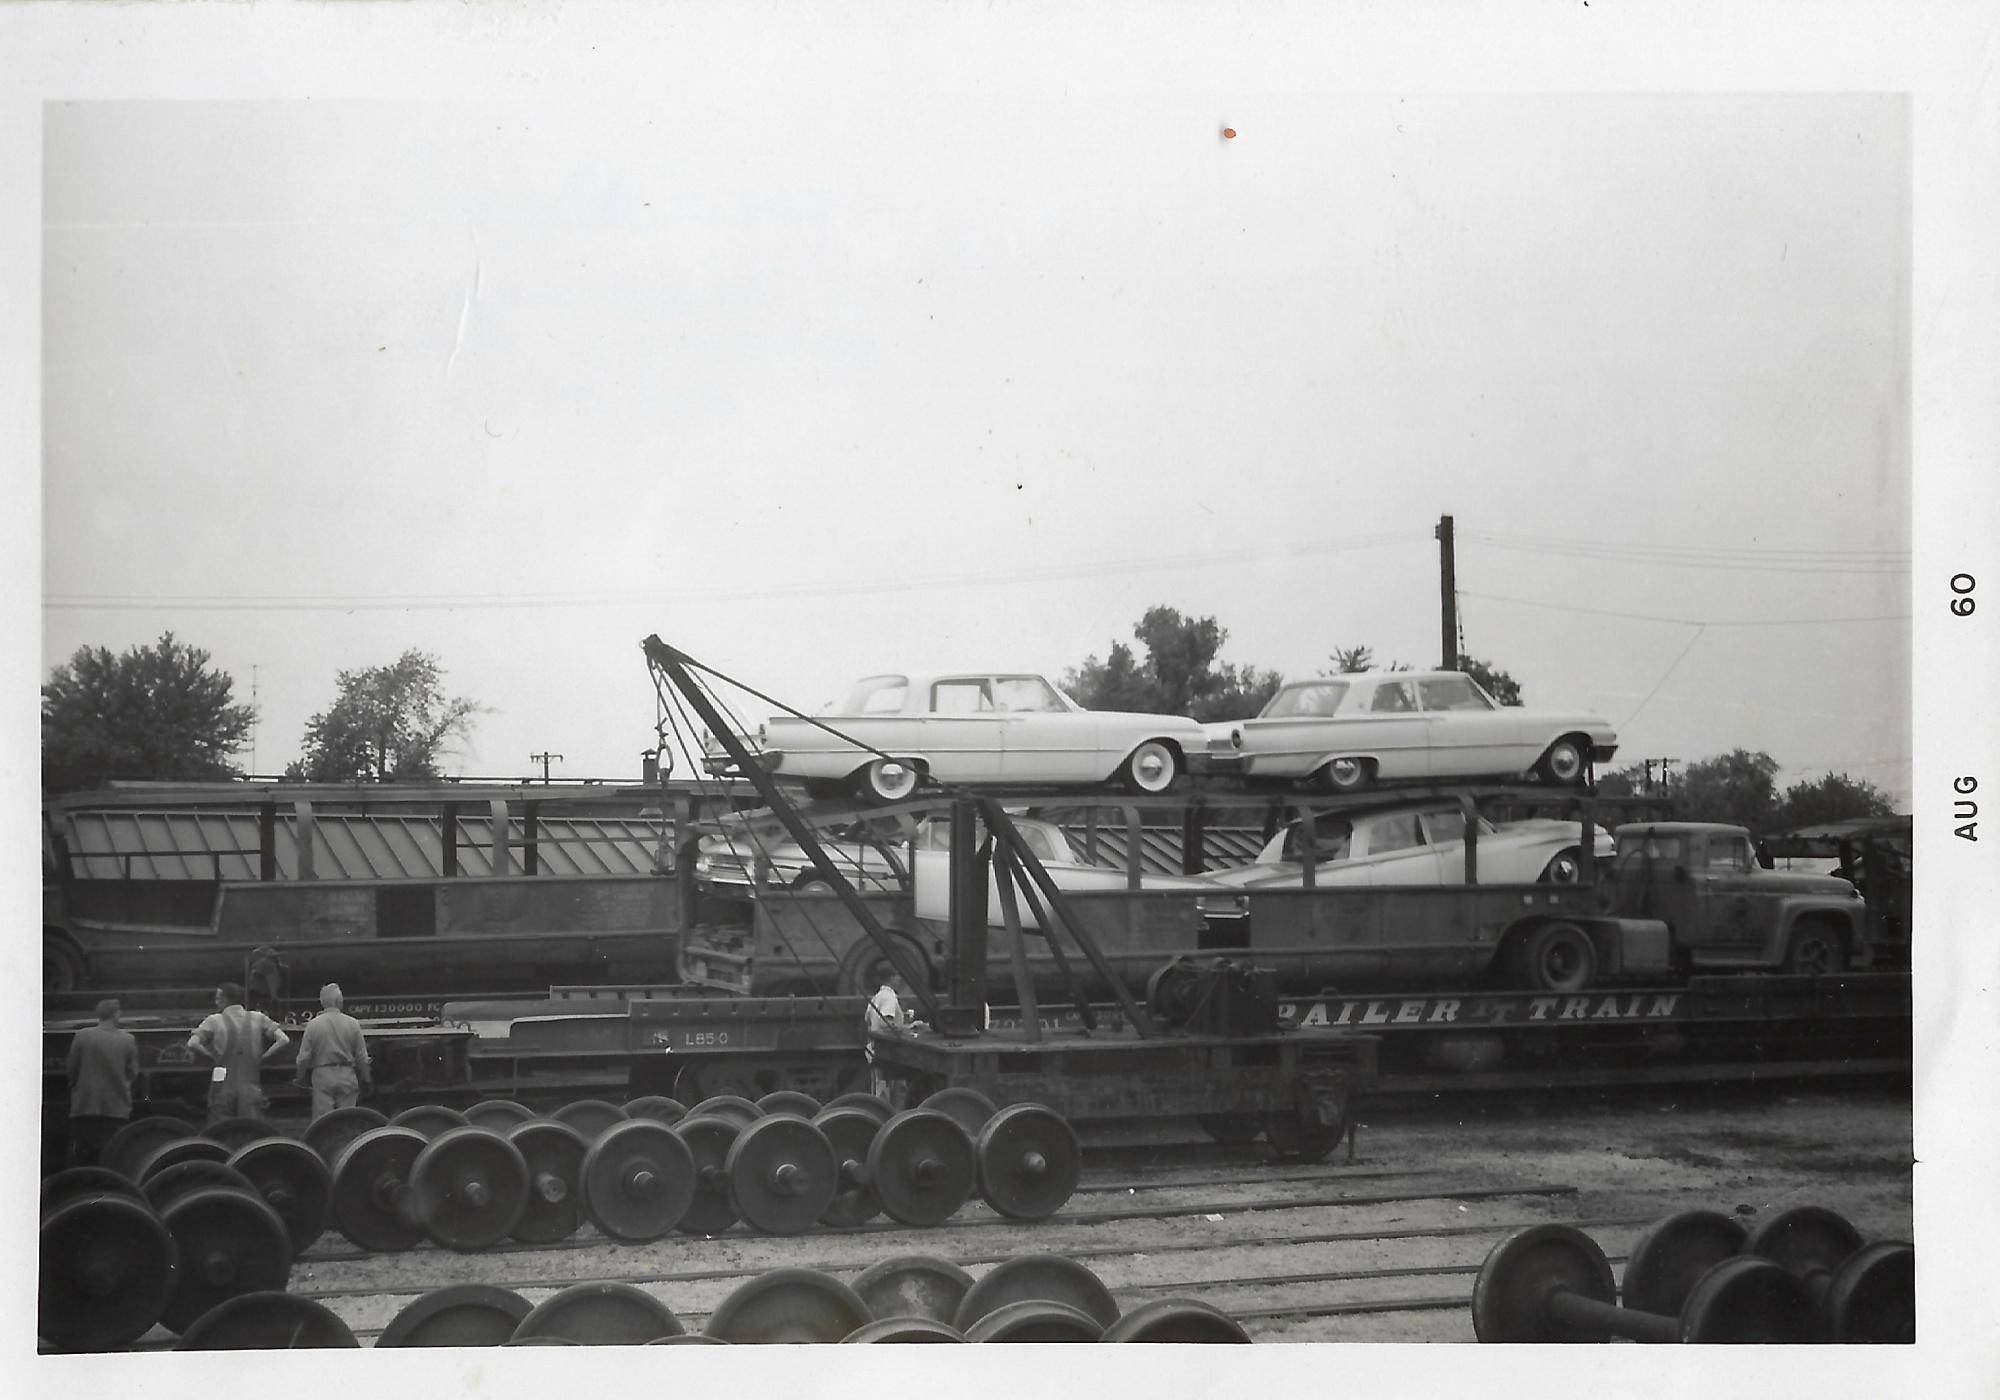 Train Delivery of Ford Cars